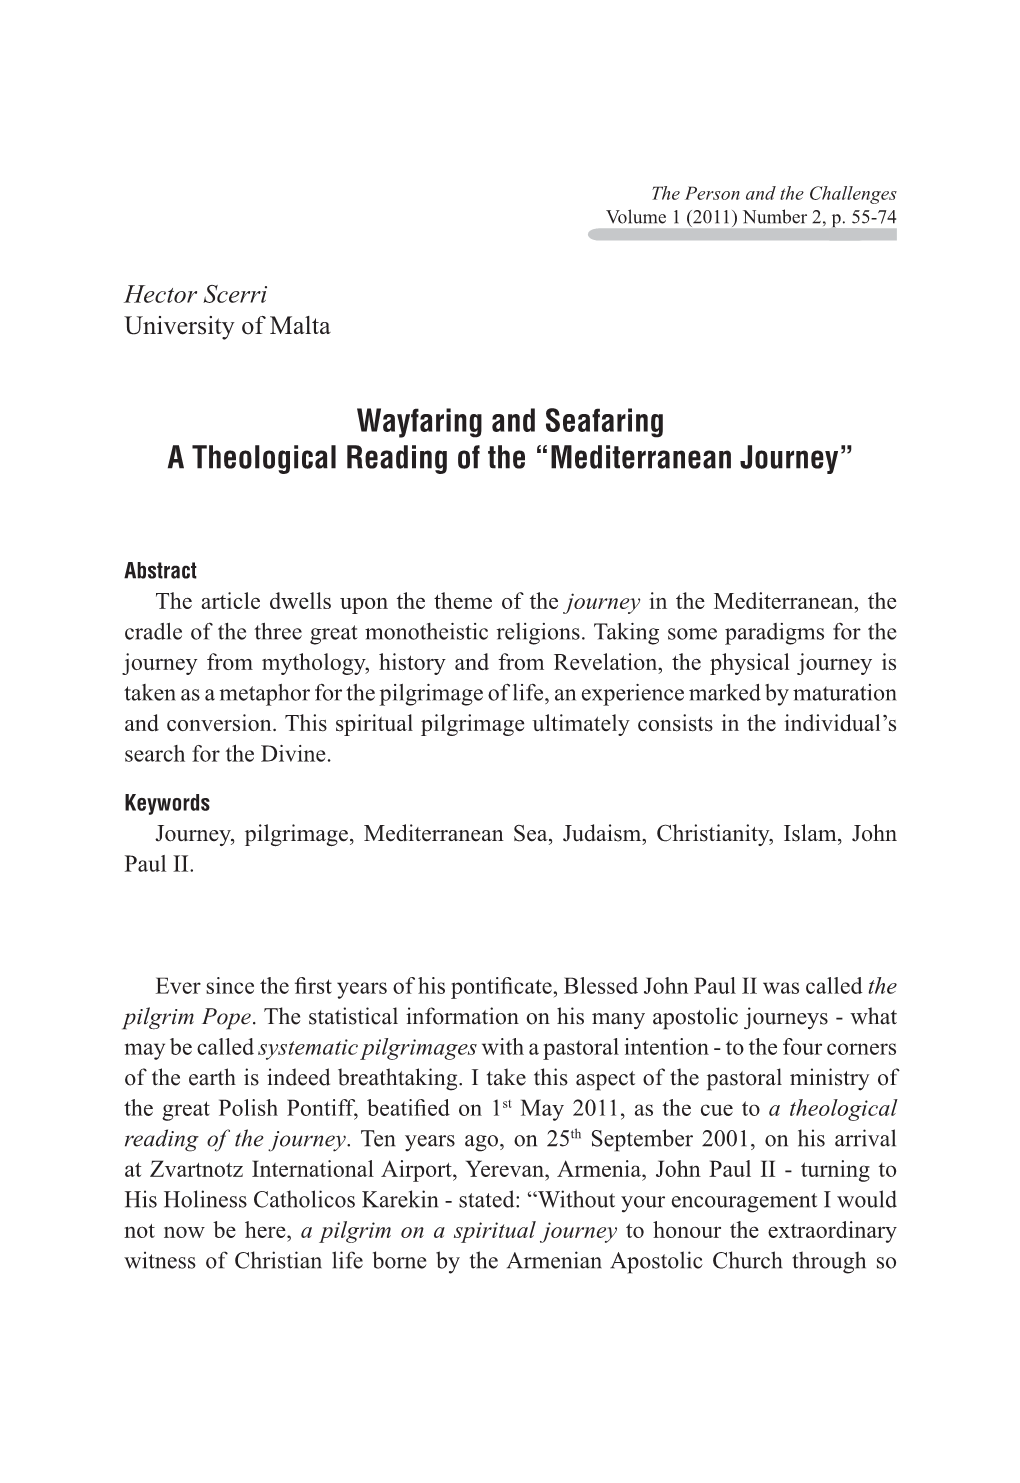 Wayfaring and Seafaring a Theological Reading of the “Mediterranean Journey”